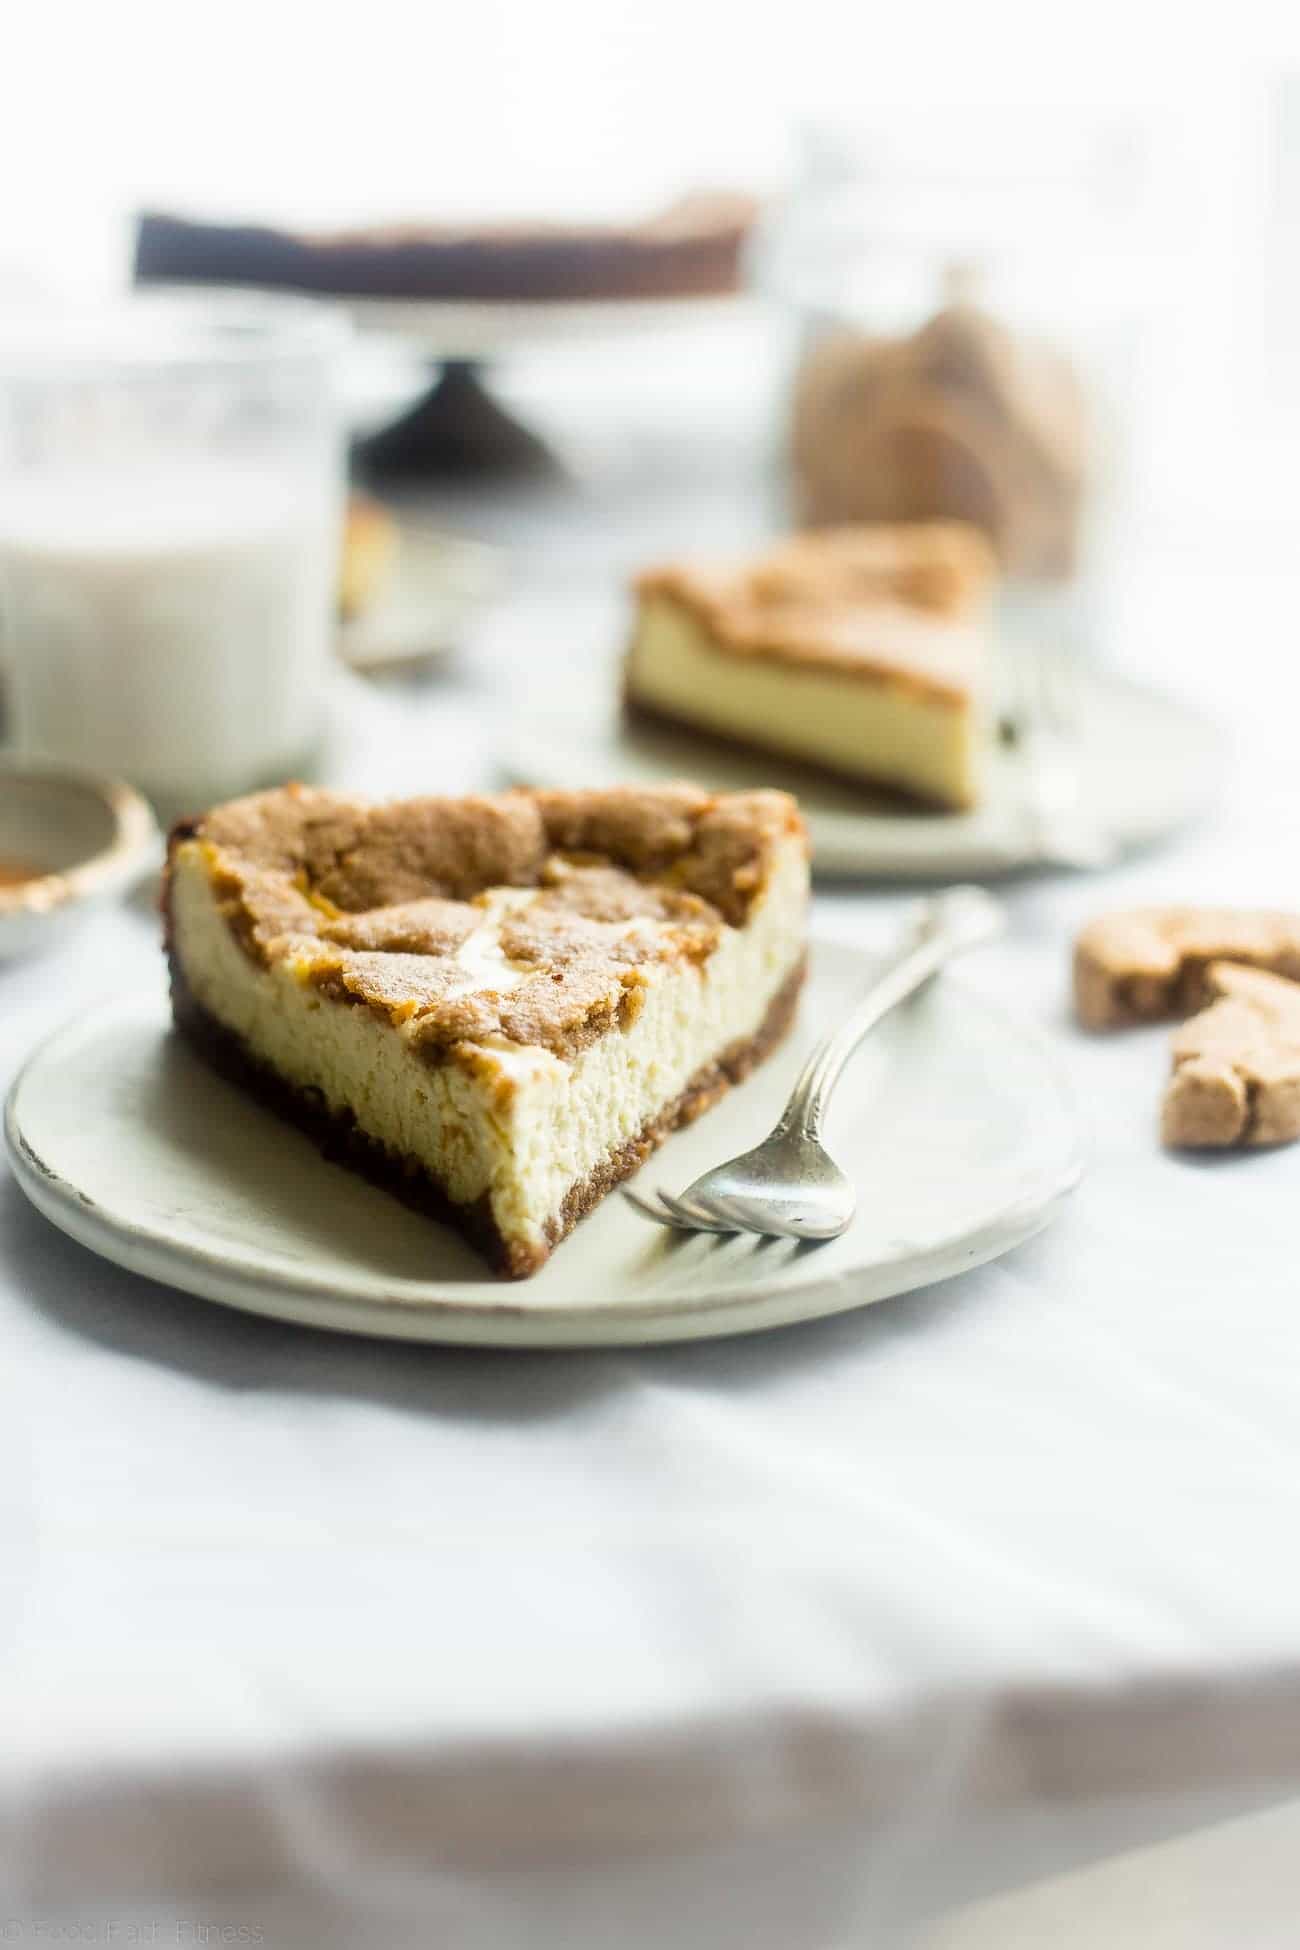 Gluten Free Snickerdoodle Greek Yogurt Cheesecake - This easy, protein-packed cheesecake has a soft and chewy, grain and gluten free snickerdoodle crust! It's a healthier, delicious and festive dessert for the holidays! | Foodfaithfitness.com | @FoodFaithFit